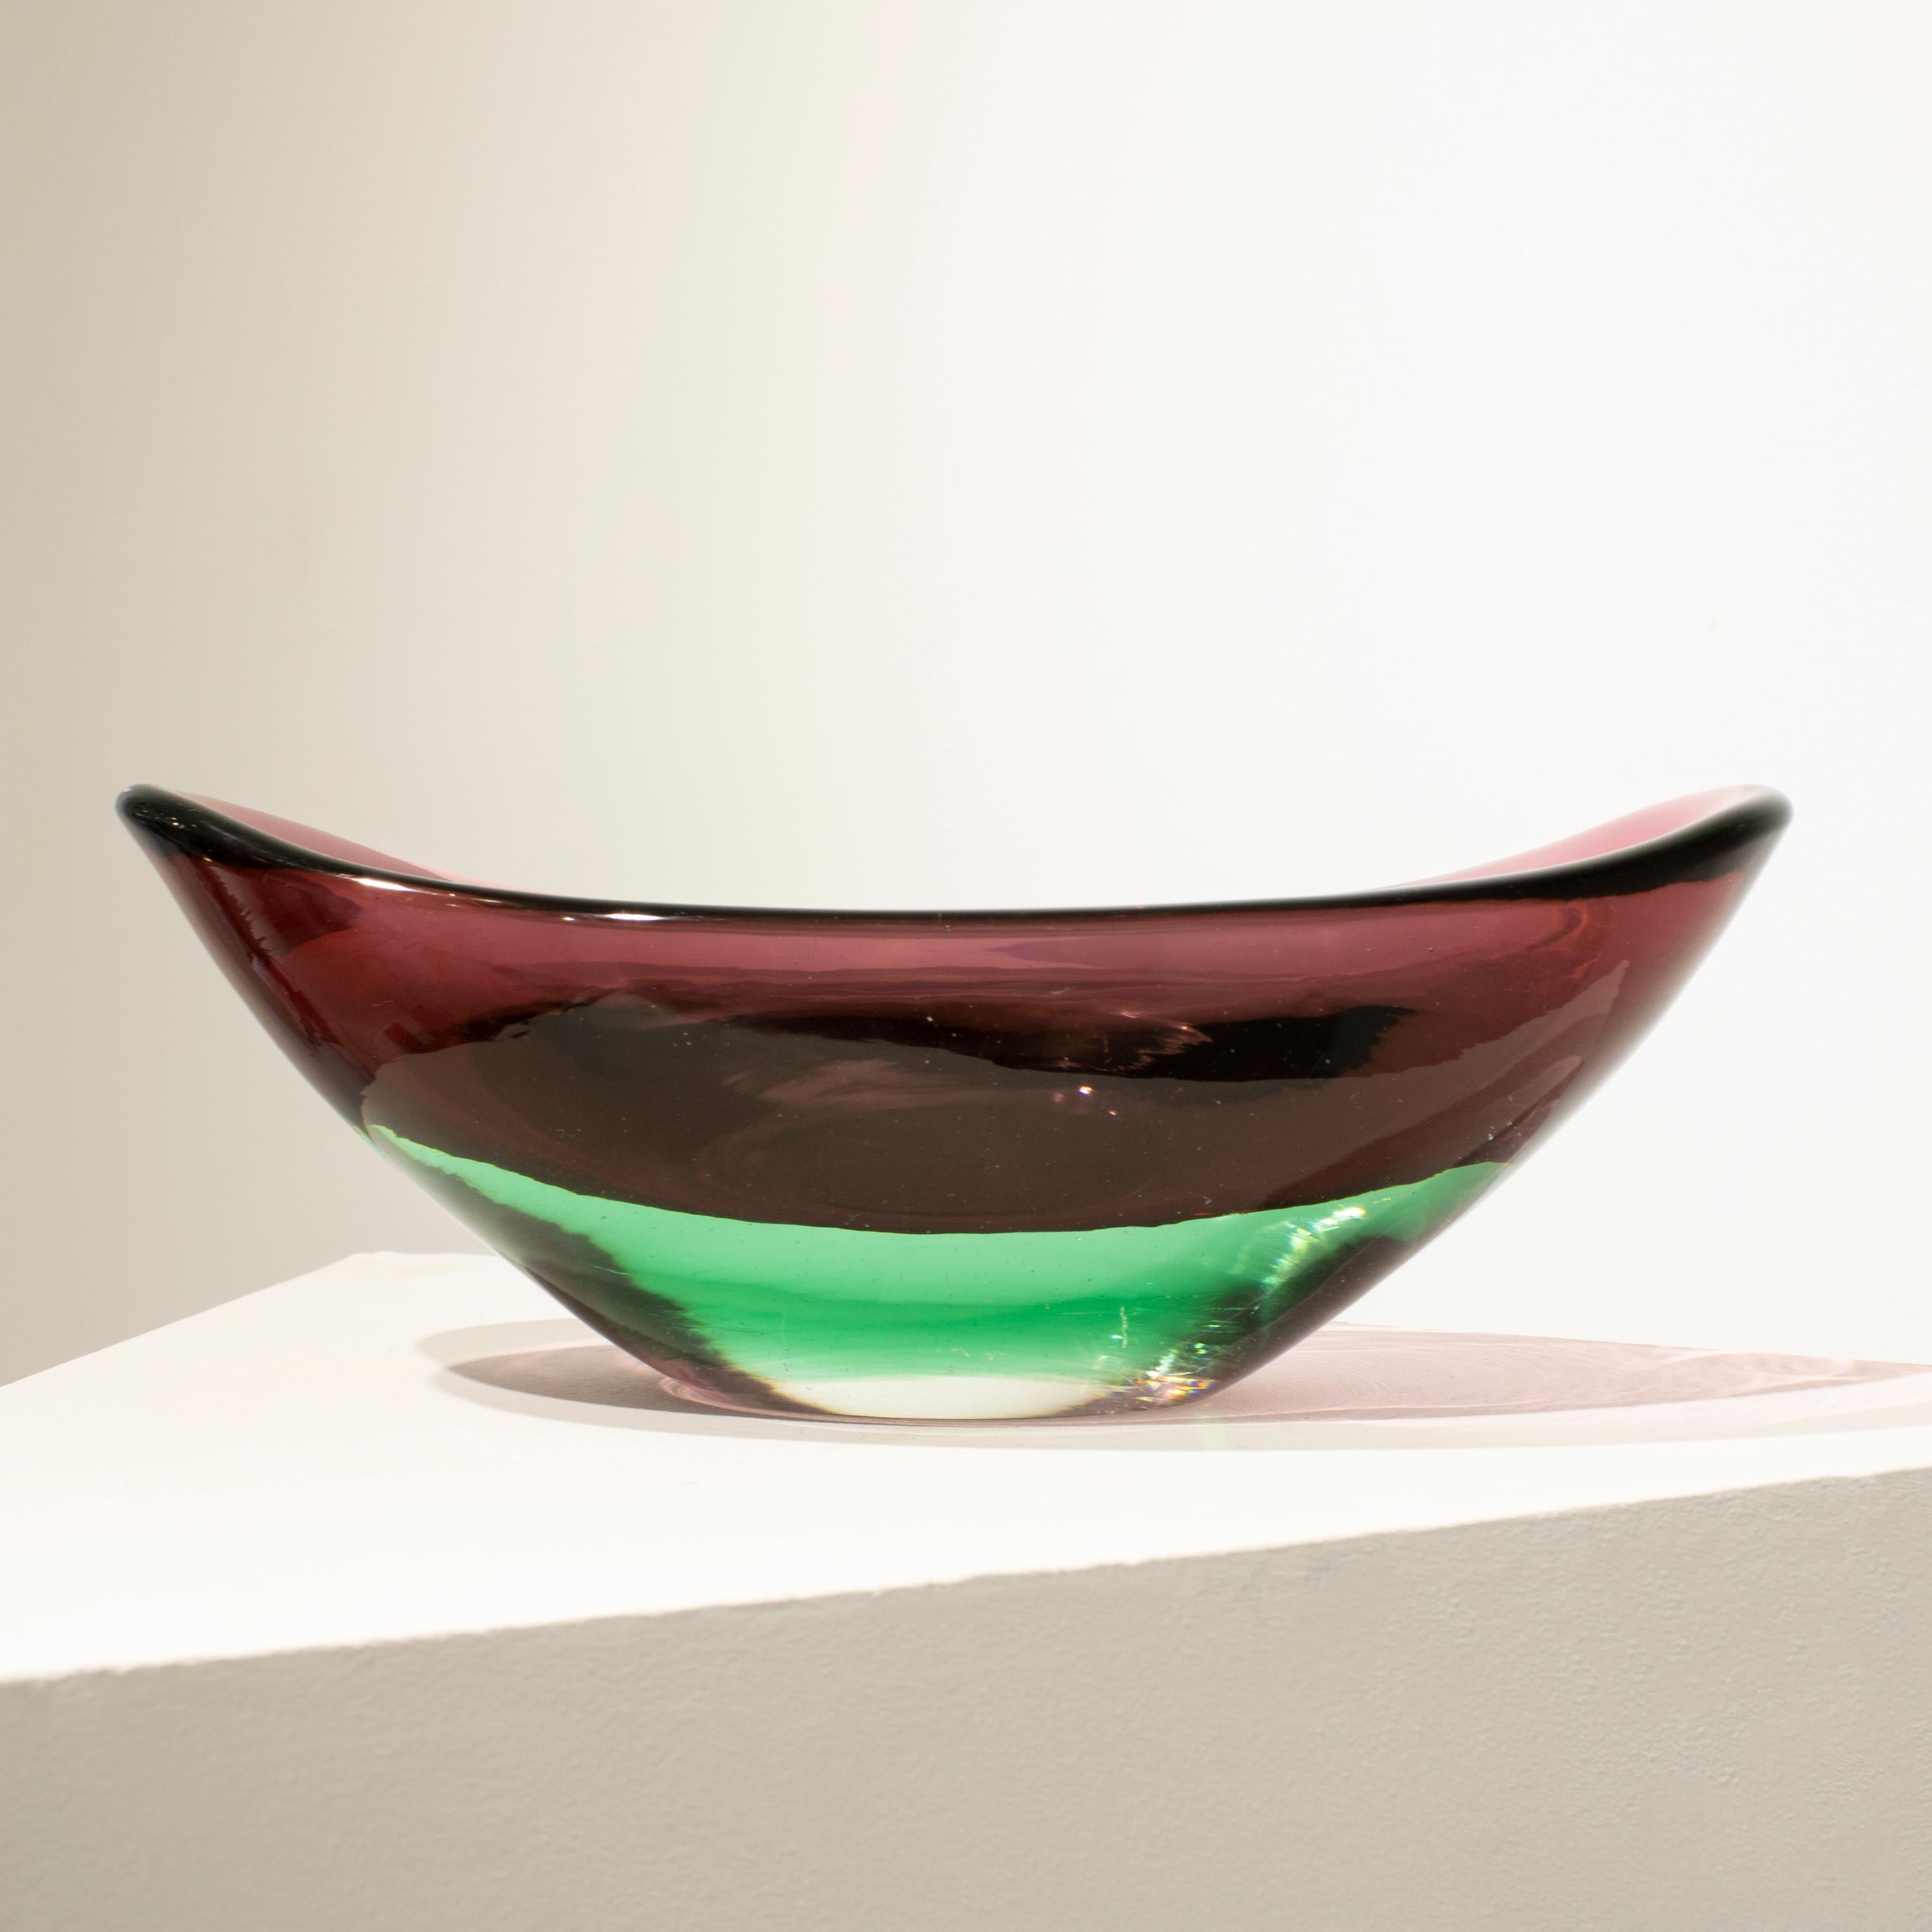 Italian Center Piece designed in the 1970´s, hand-crafted in Murano glass with curved shape, in pink and green.